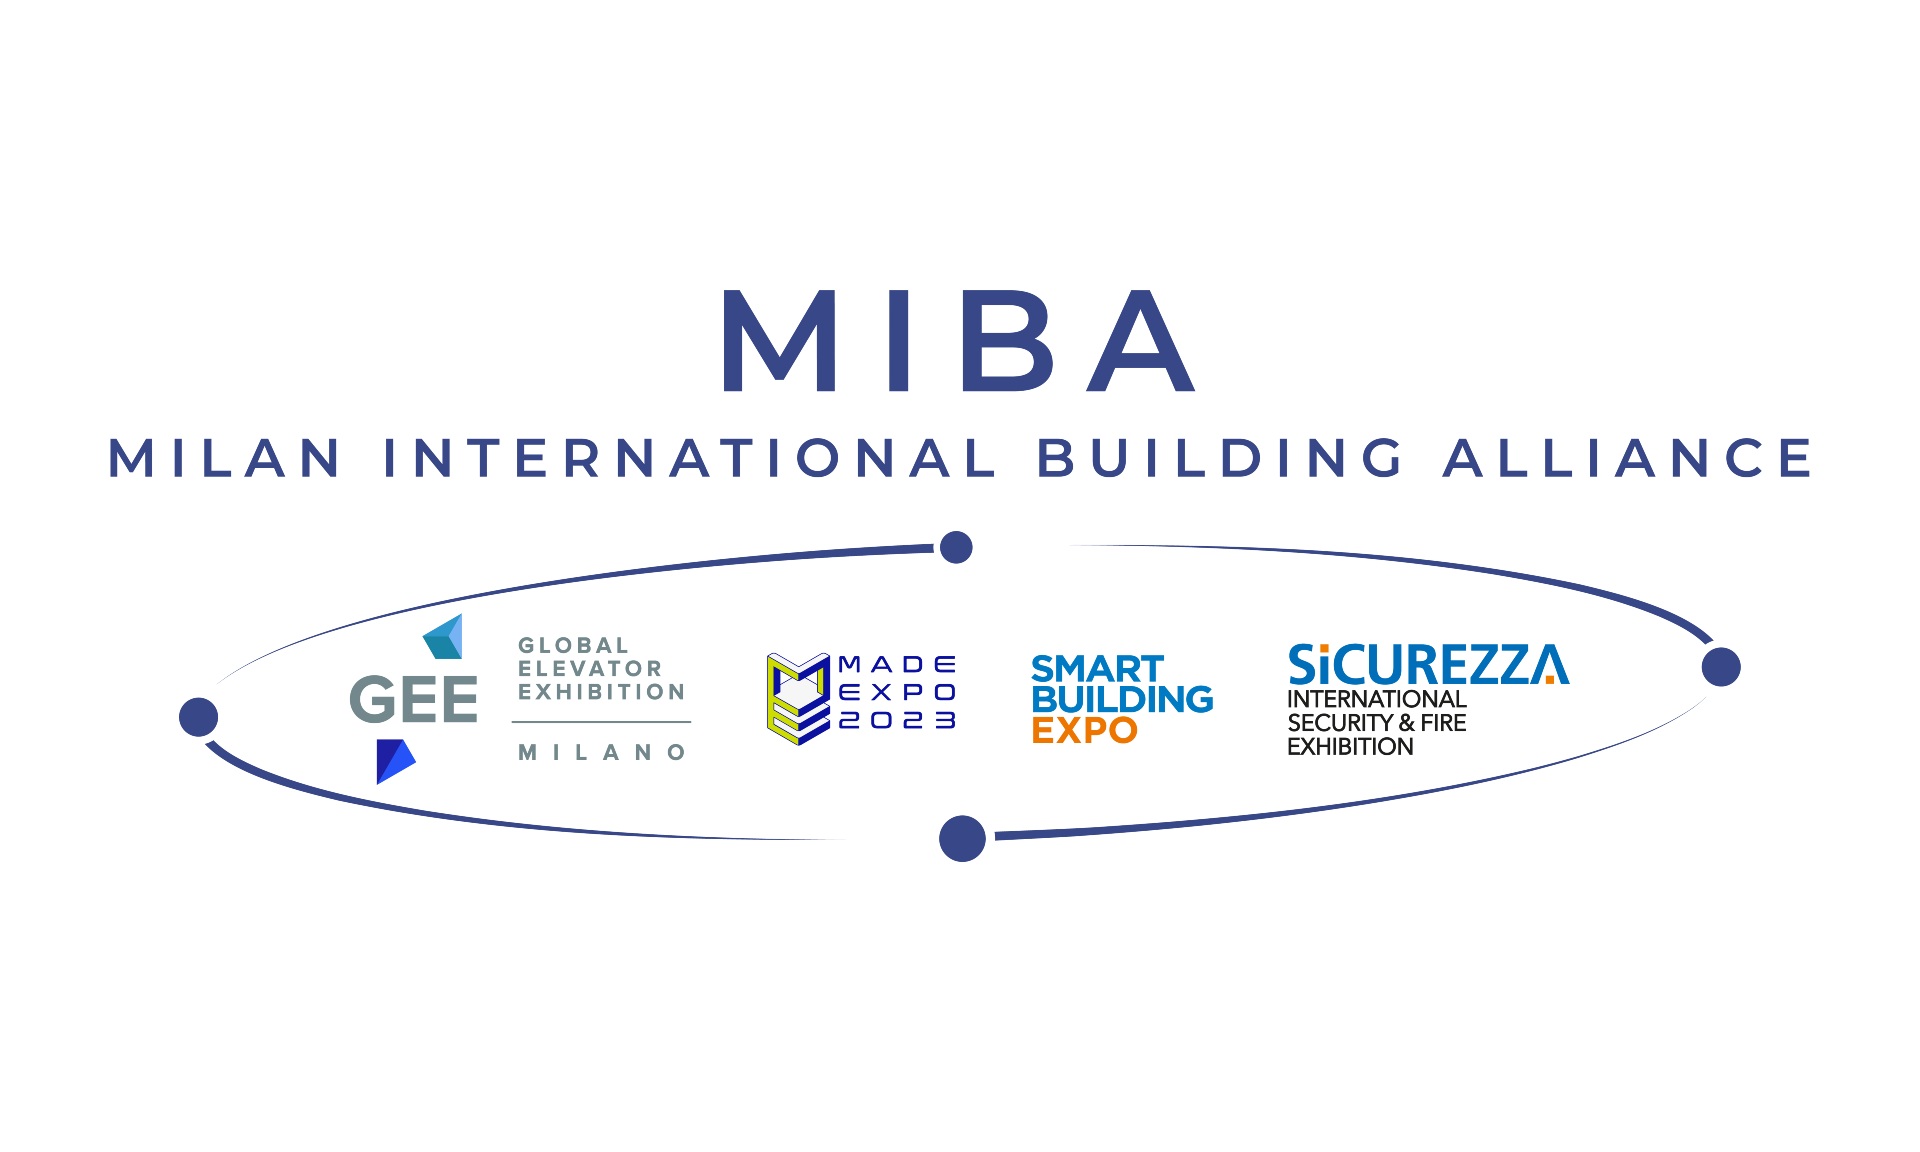 Here comes MIBA - The Milan International Building Alliance